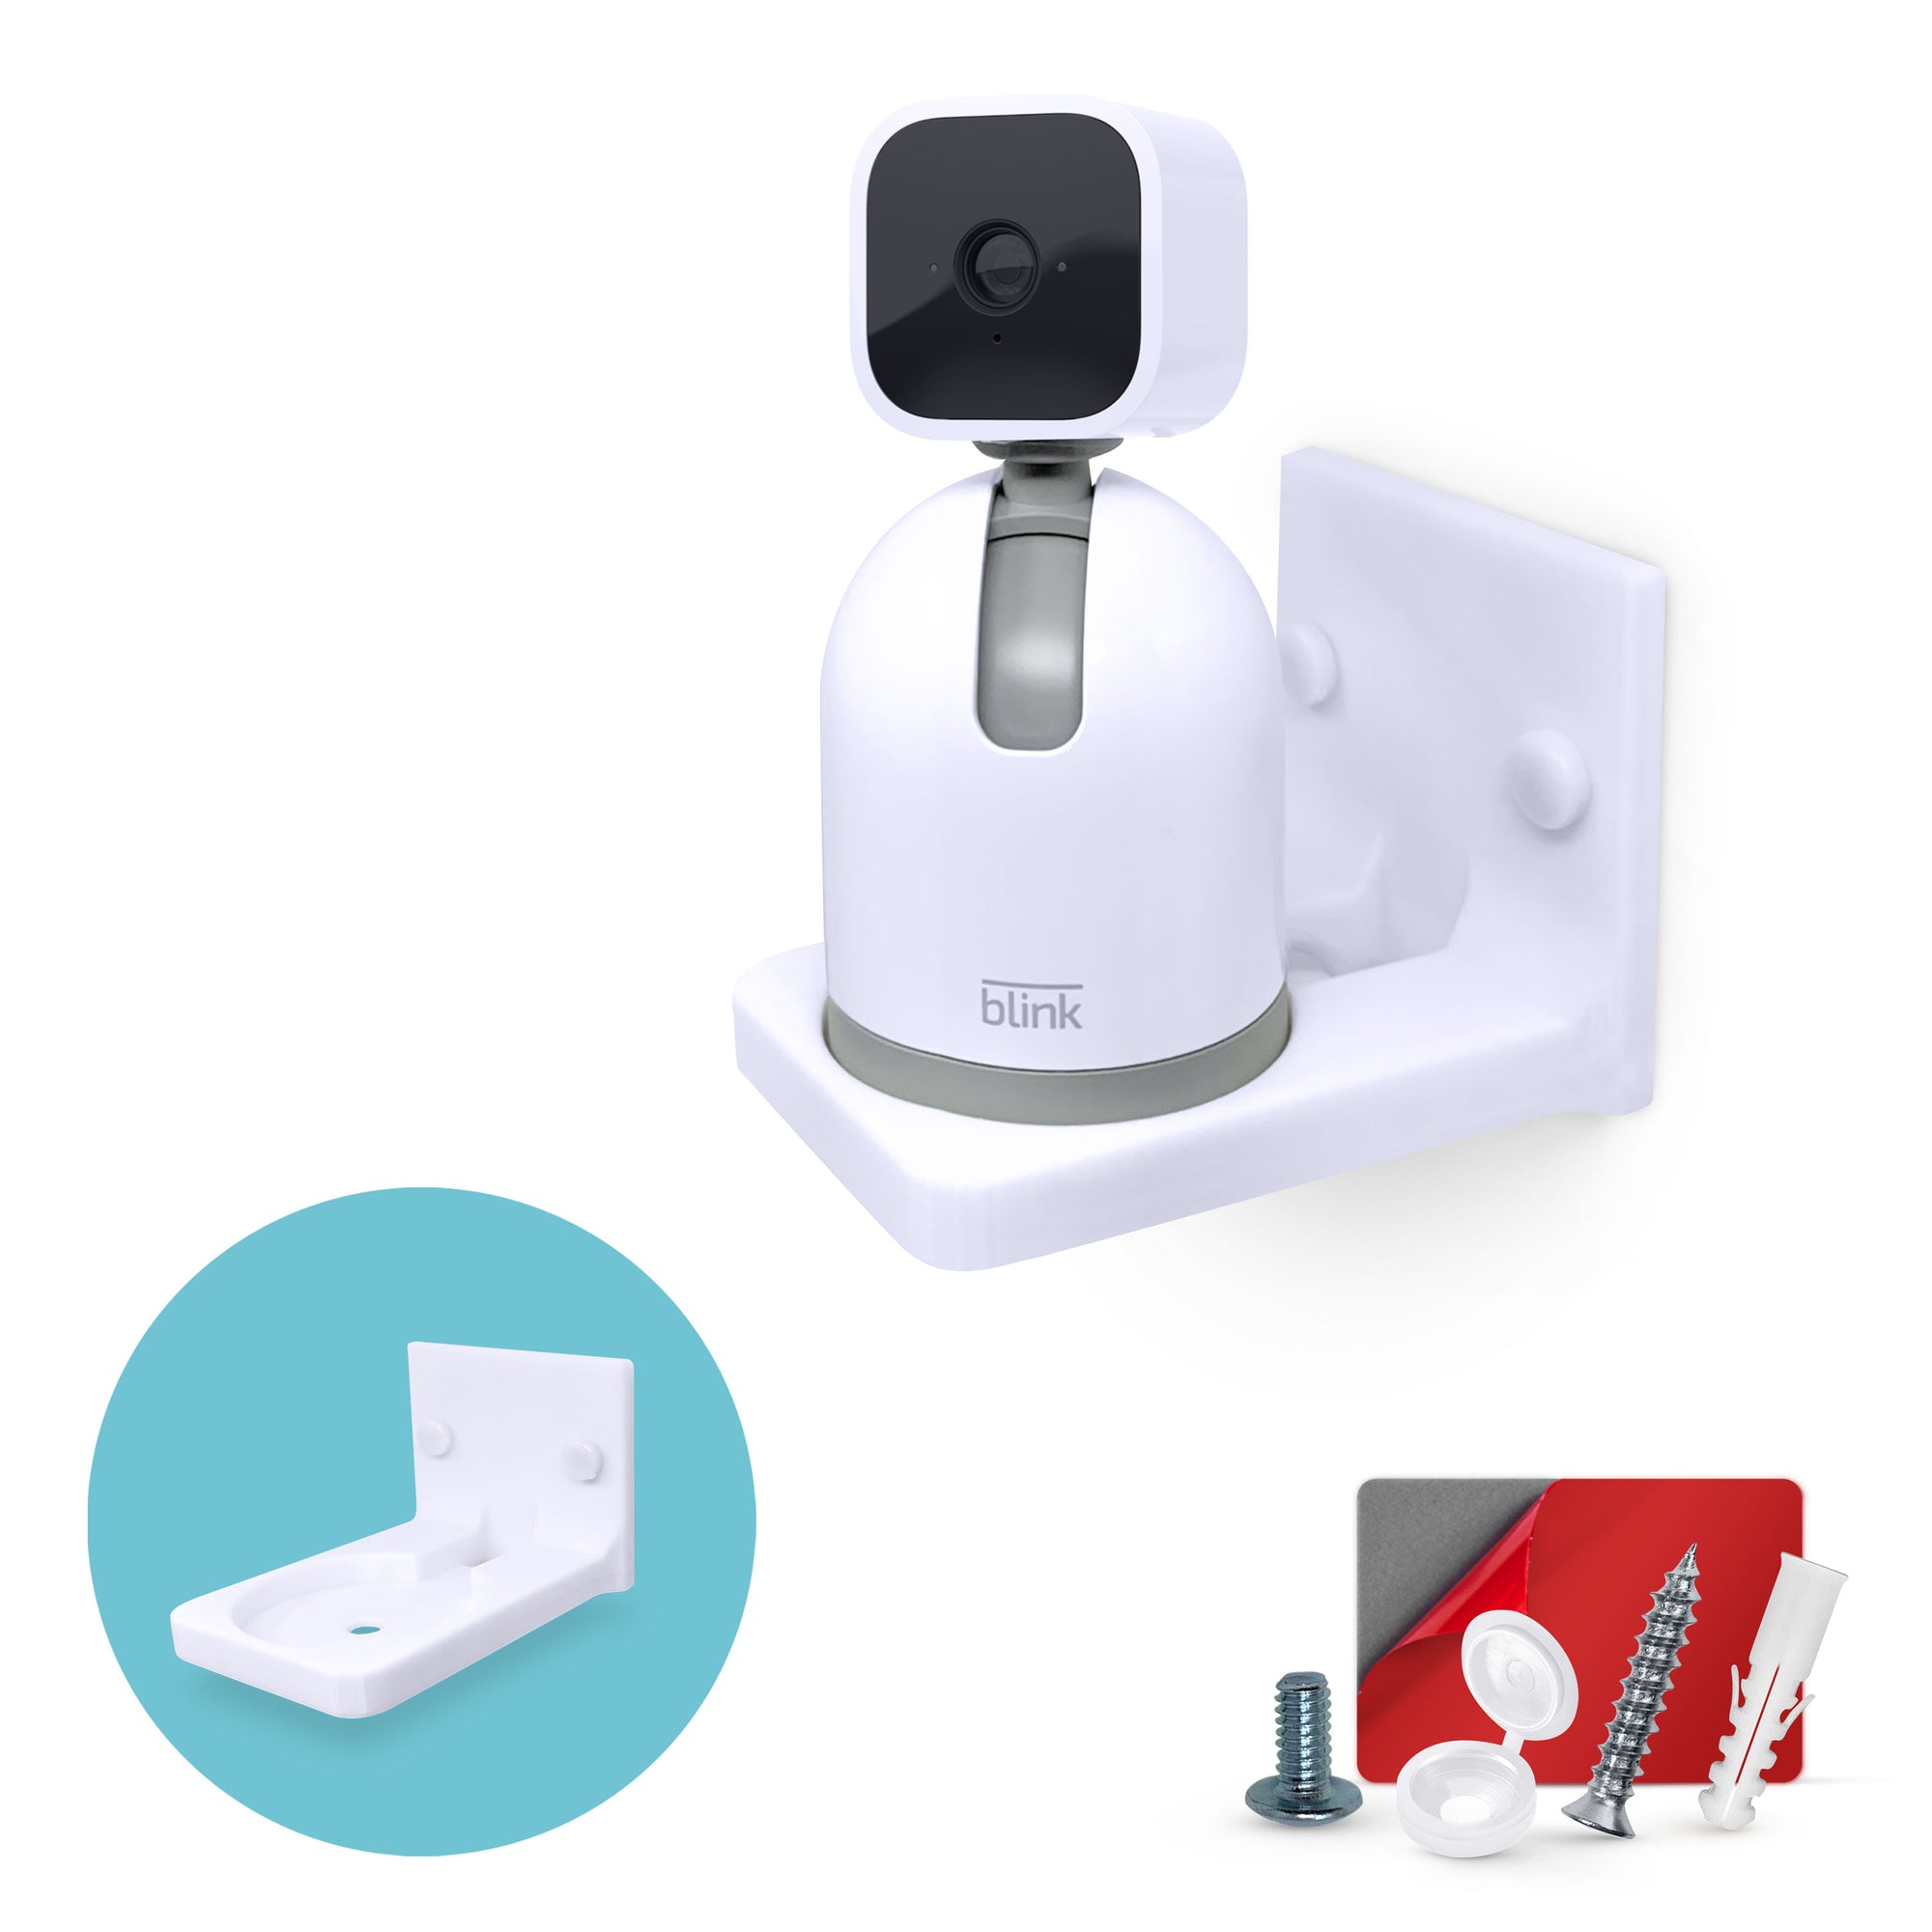 Wall Mount for Blink Mini Pan Tilt Accessory, Security Camera Holder, Adhesive & Screw-In